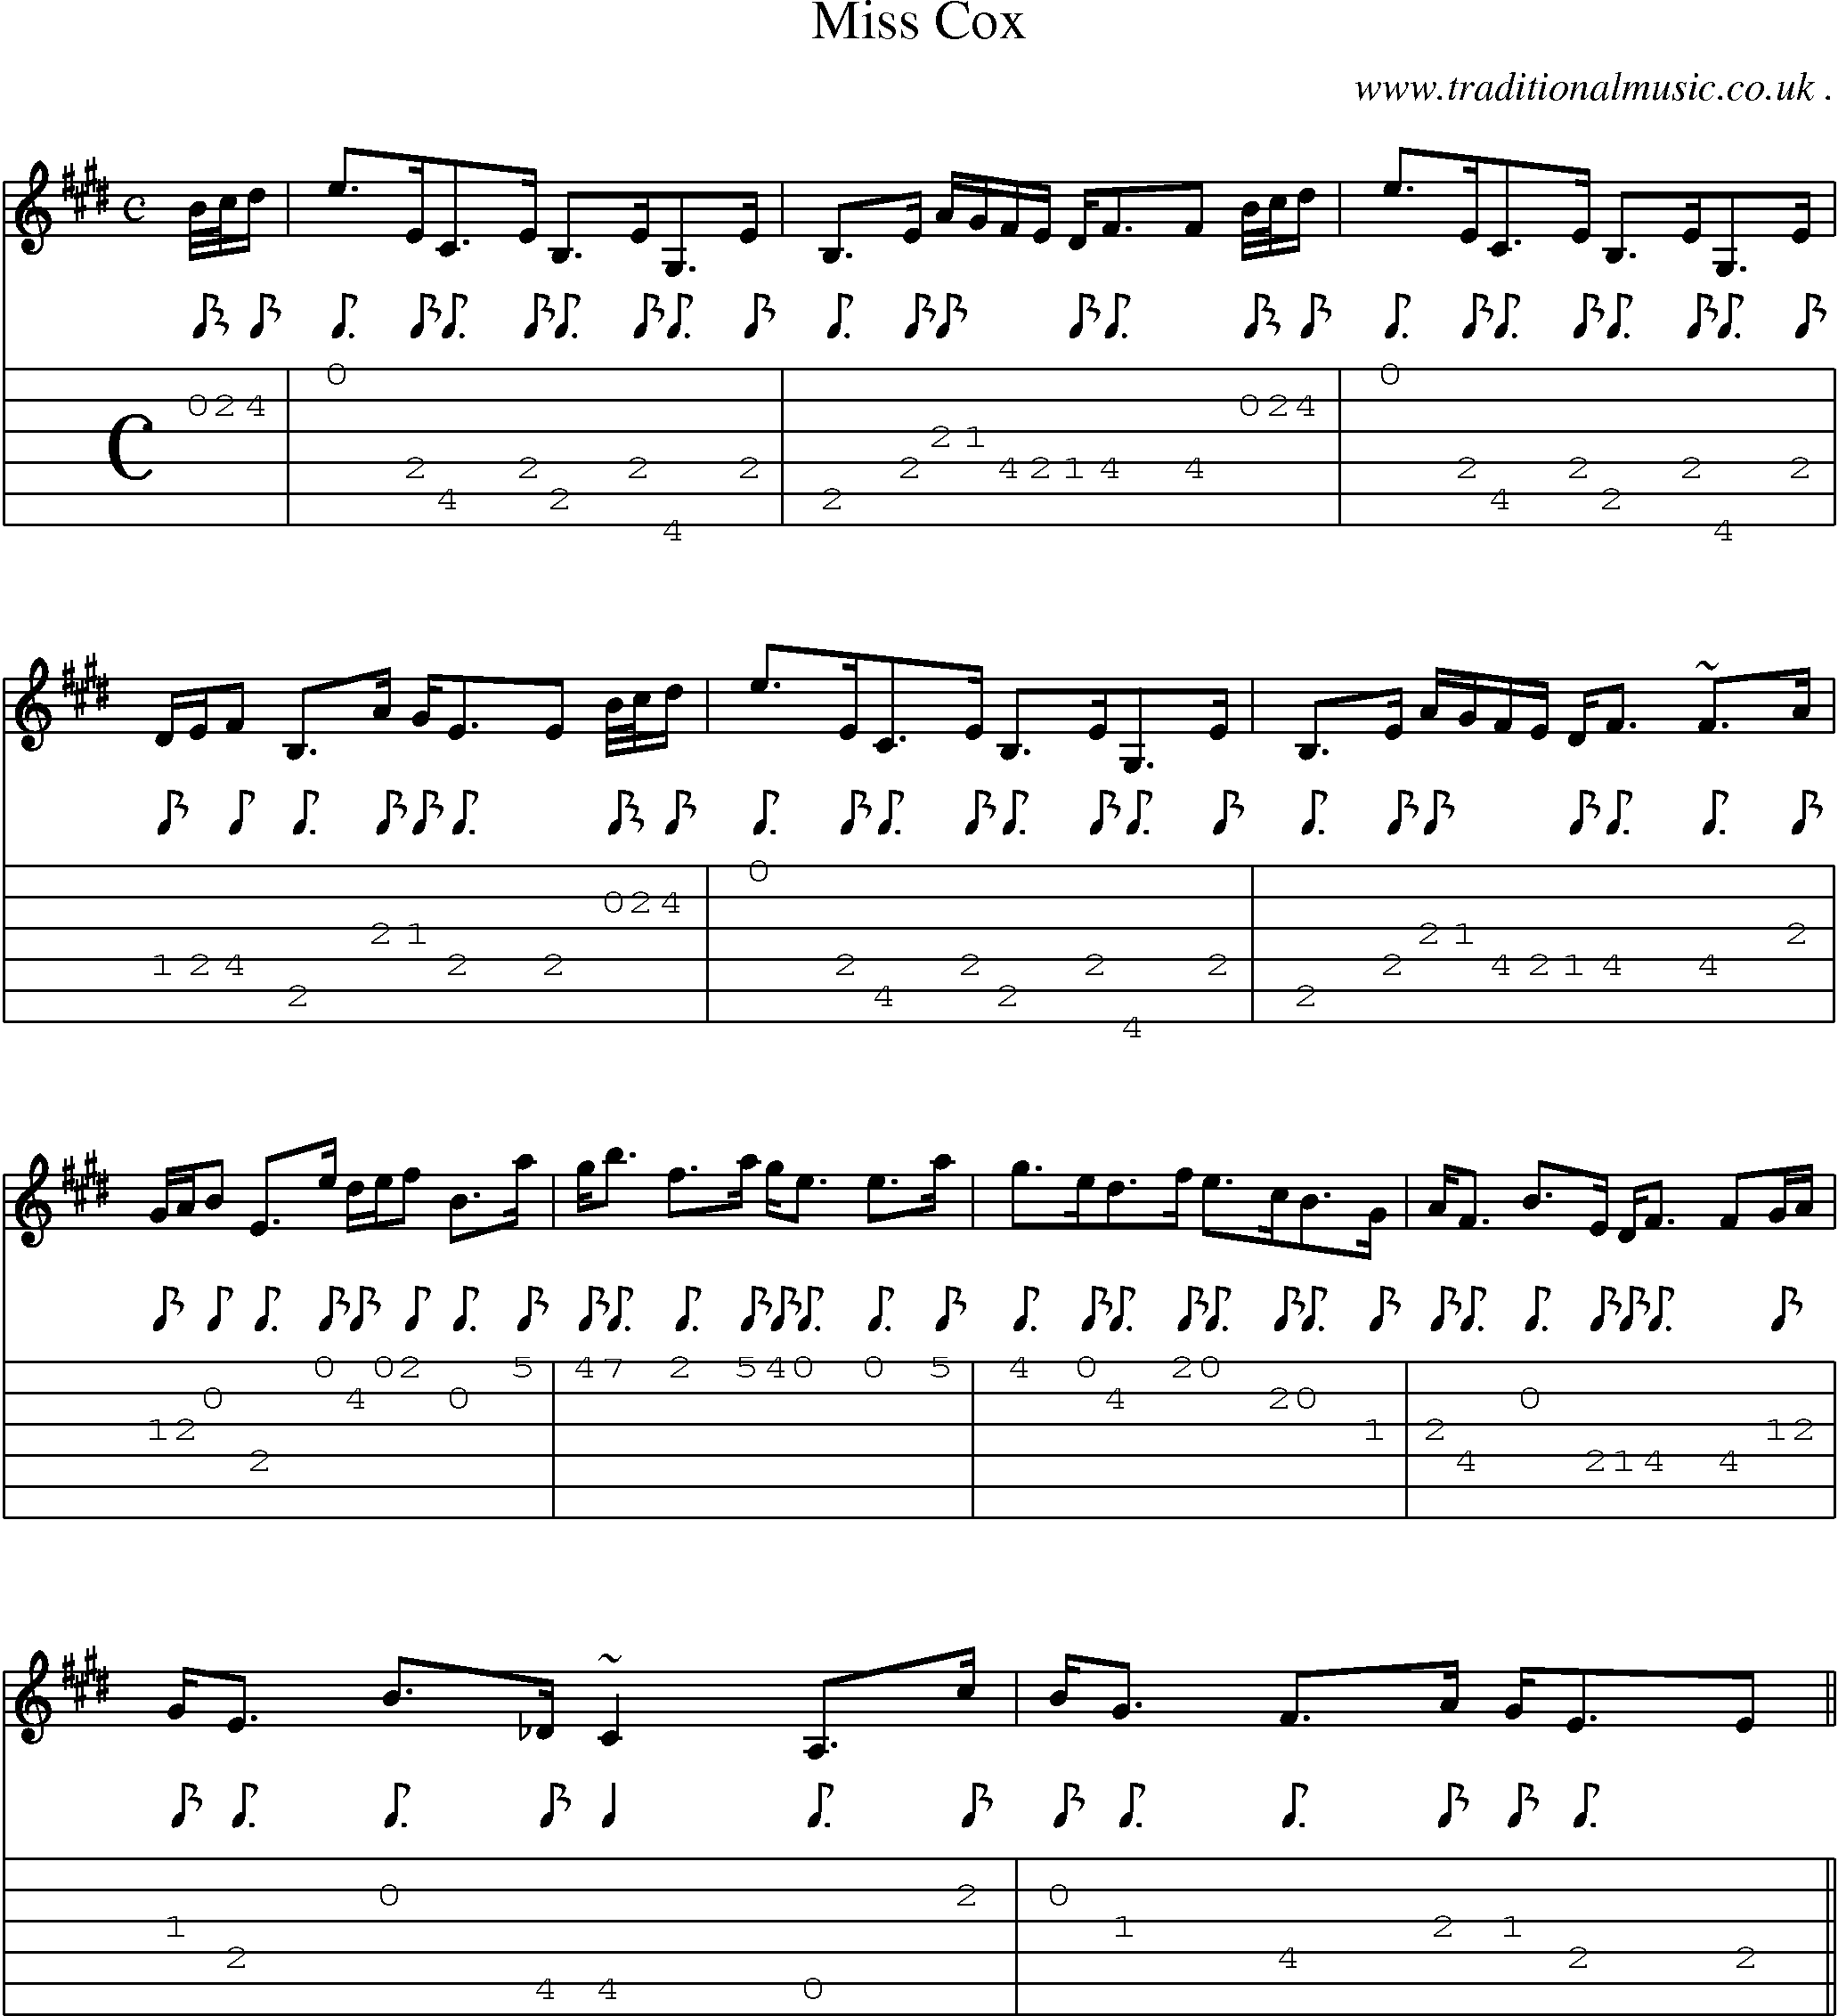 Sheet-music  score, Chords and Guitar Tabs for Miss Cox